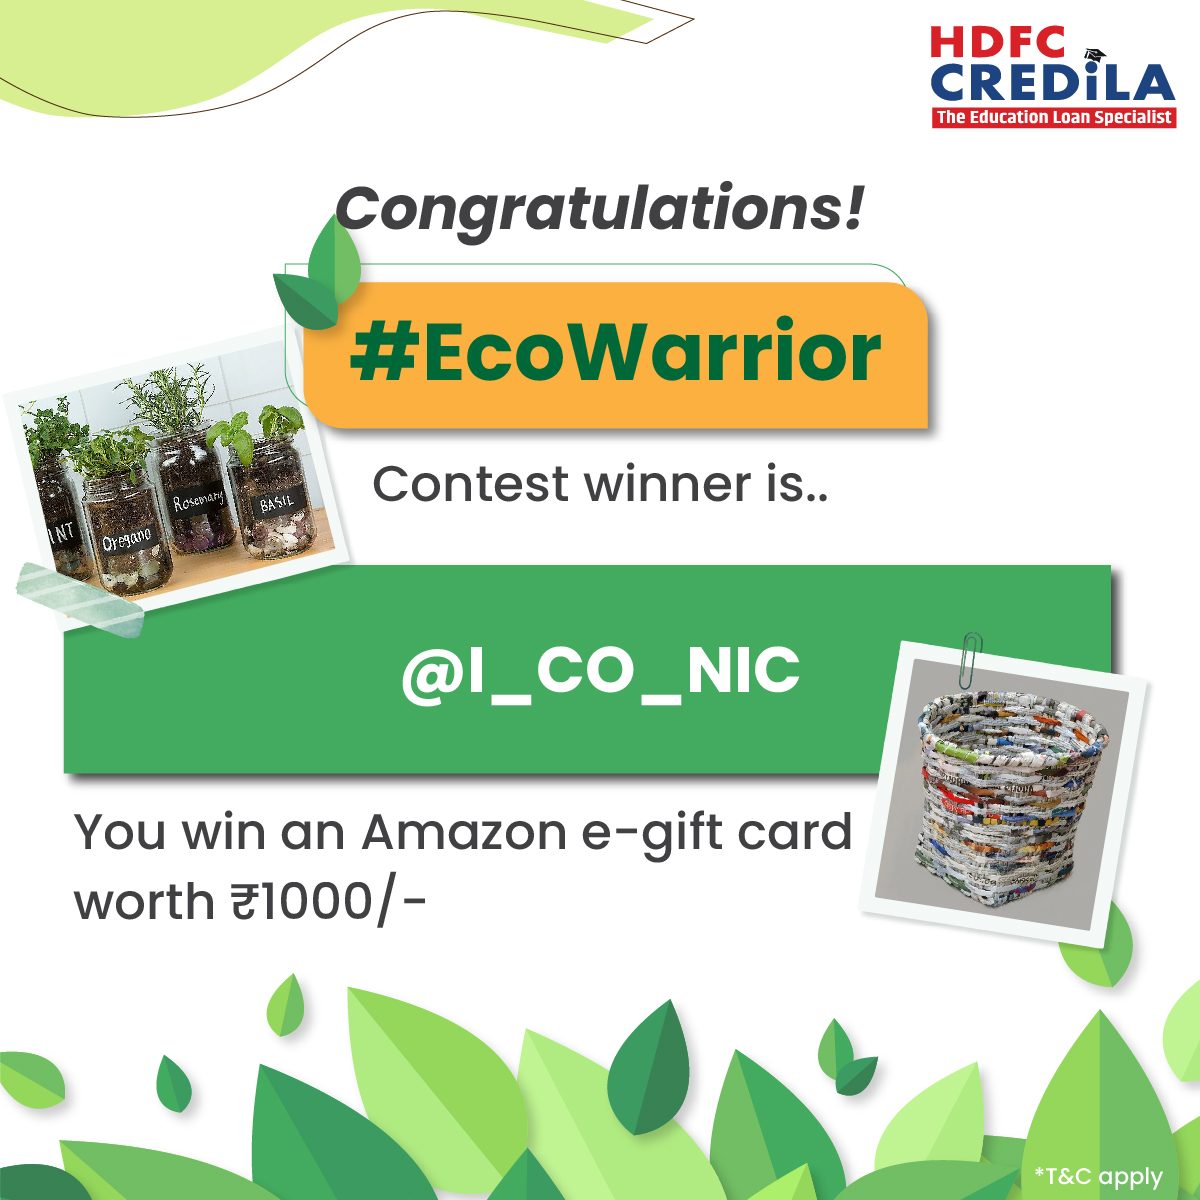 Thank you for participating, and congratulations to our contest winner! Watch this space for more such contests. 

*T&C apply bit.ly/3UtjhLJ

#HDFCCredila #HDFCCredilaContest #EcoWarrior #WorldEarthDay #WorldEarthDay2024 #EarthDay #Earthday2024 #Contest #PhotoContest…